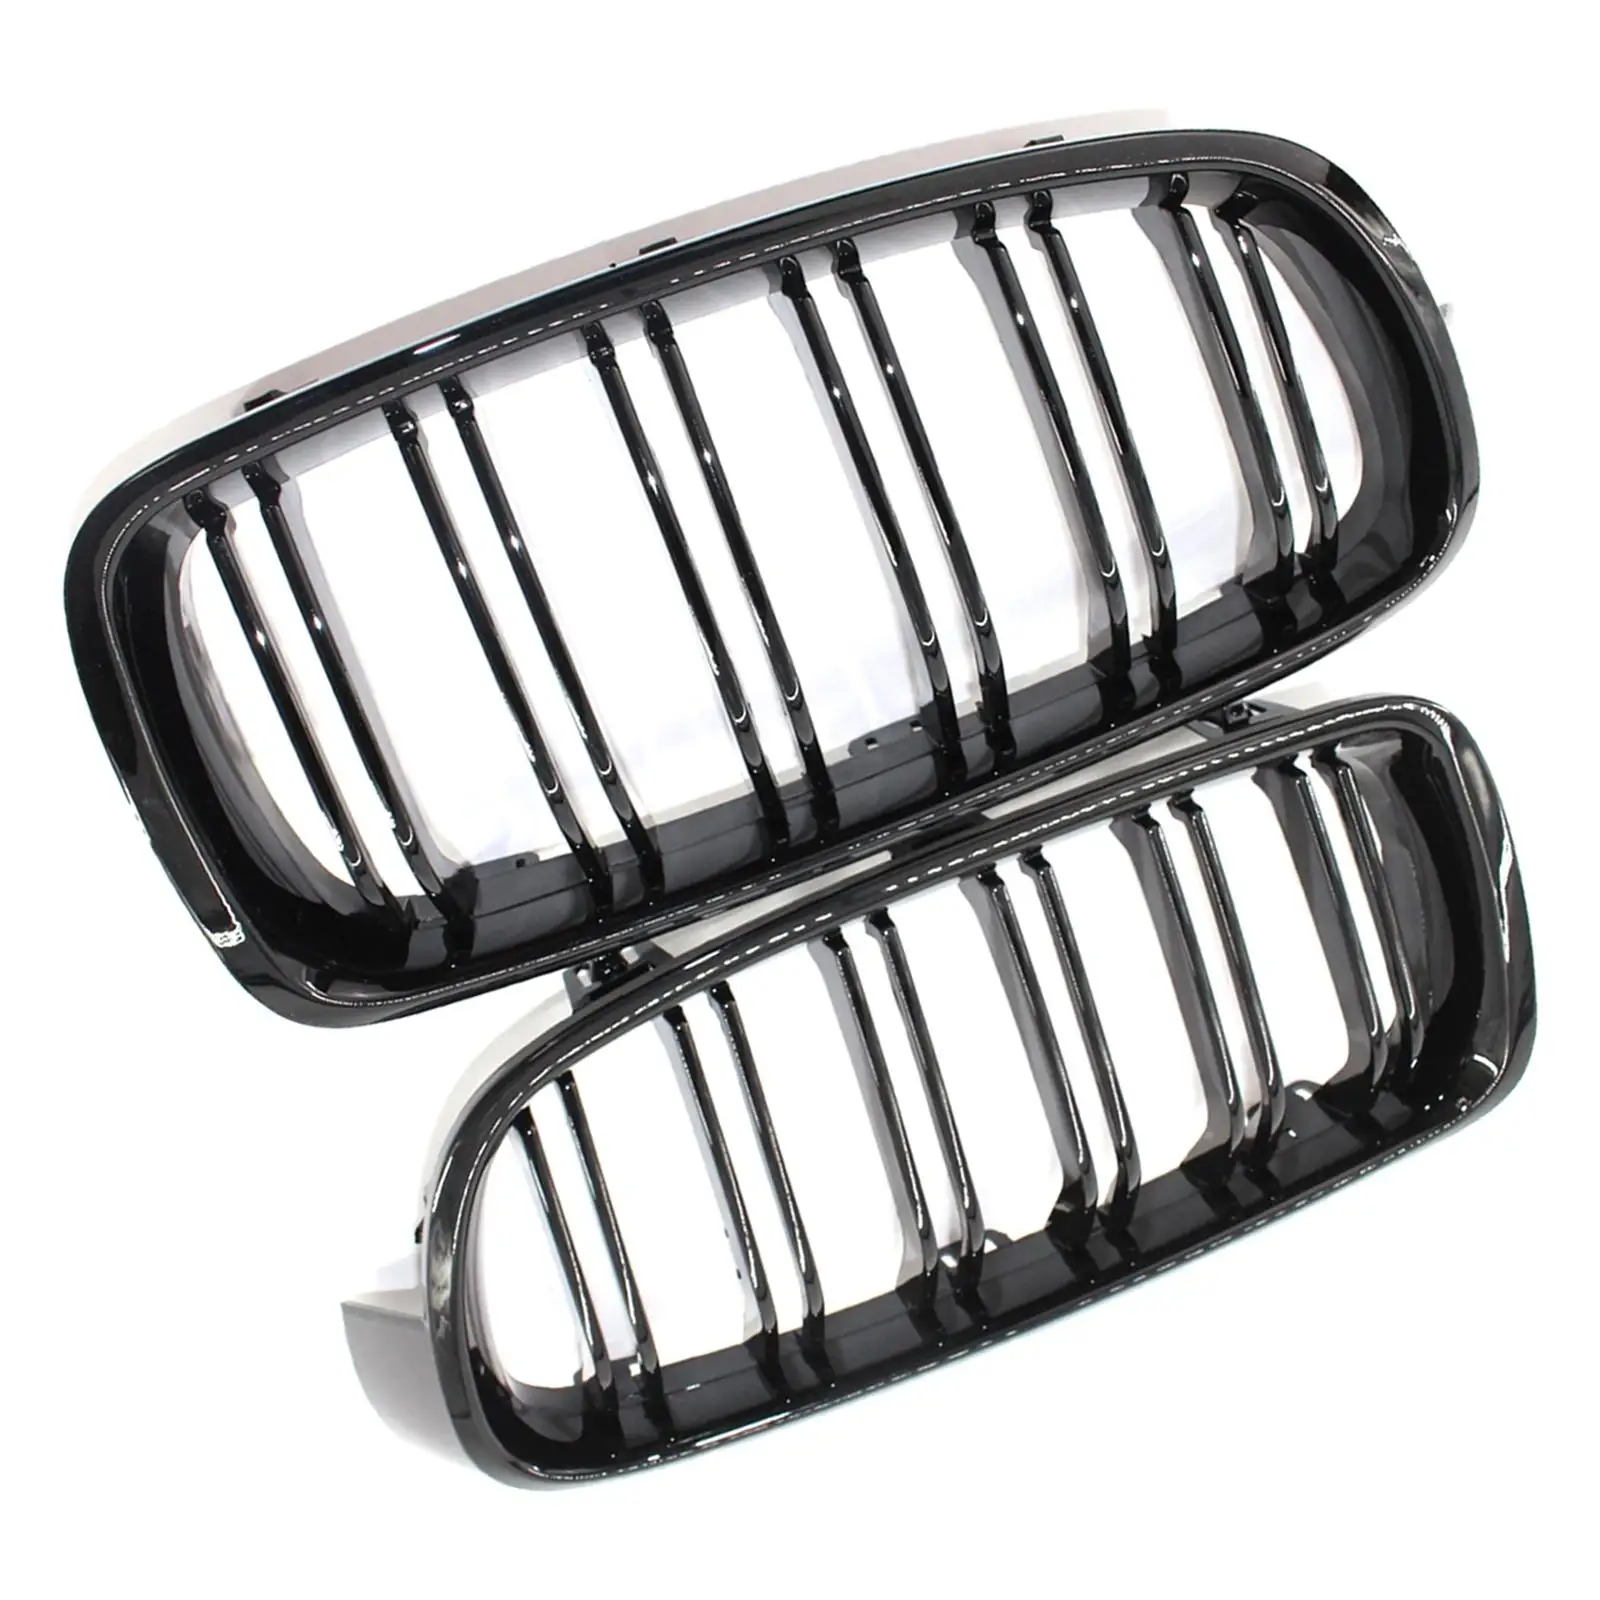 2x Front Kidney Grille Grill 51130054493 51130054494 for 3 F30 F31 F35